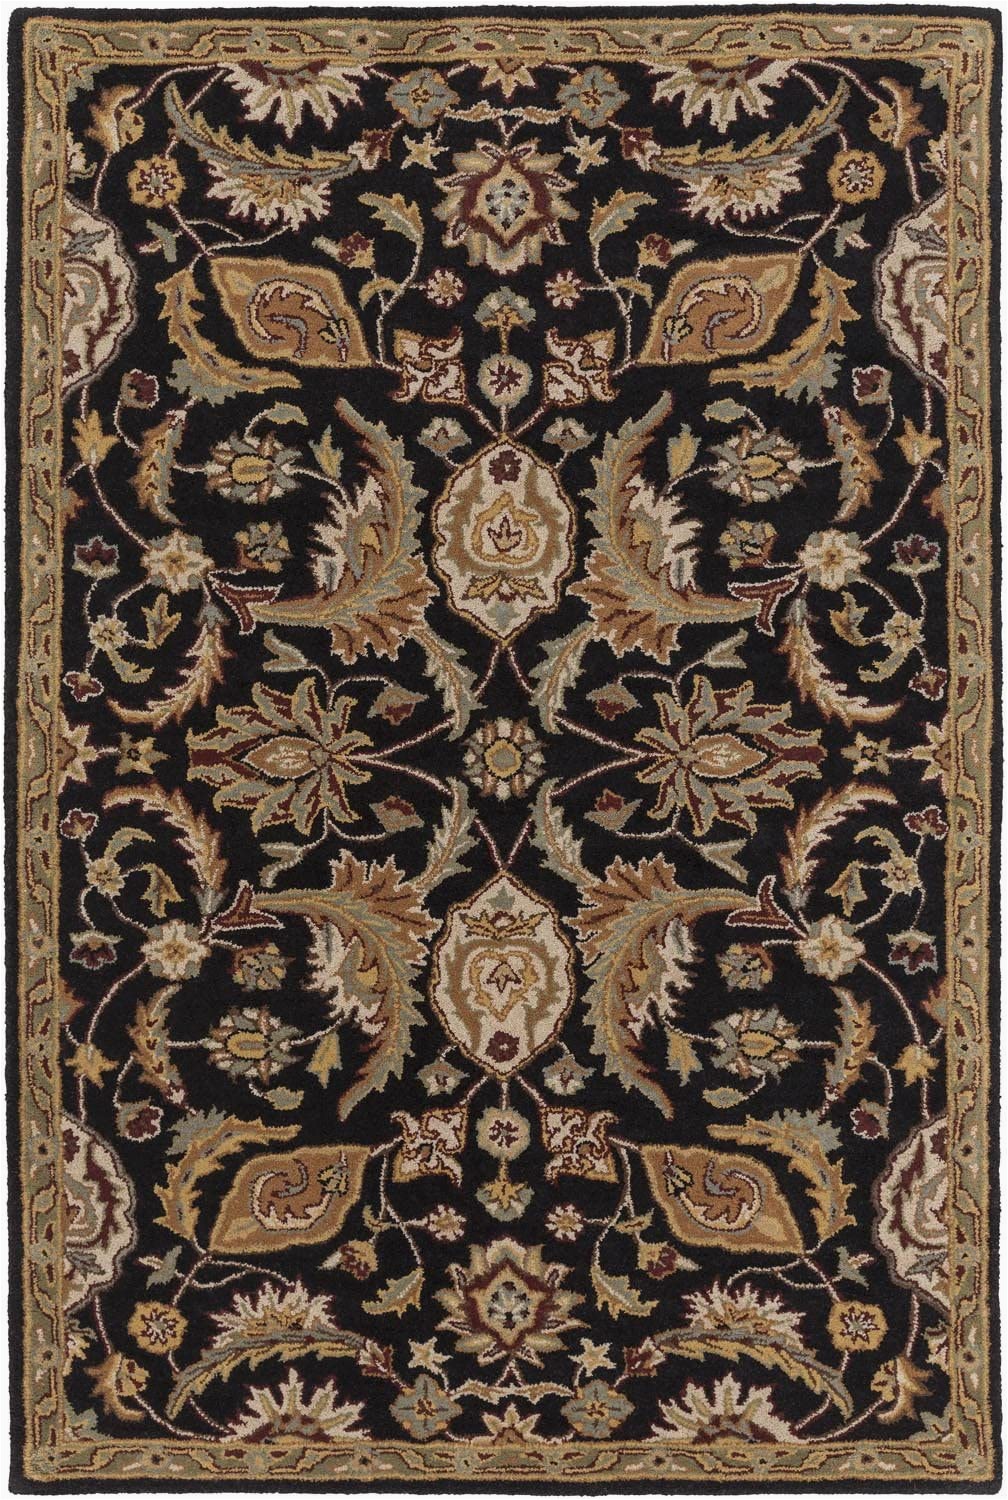 Made by Design area Rugs Super area Rugs Black Rug Classic Design 3 Foot X 5 Foot